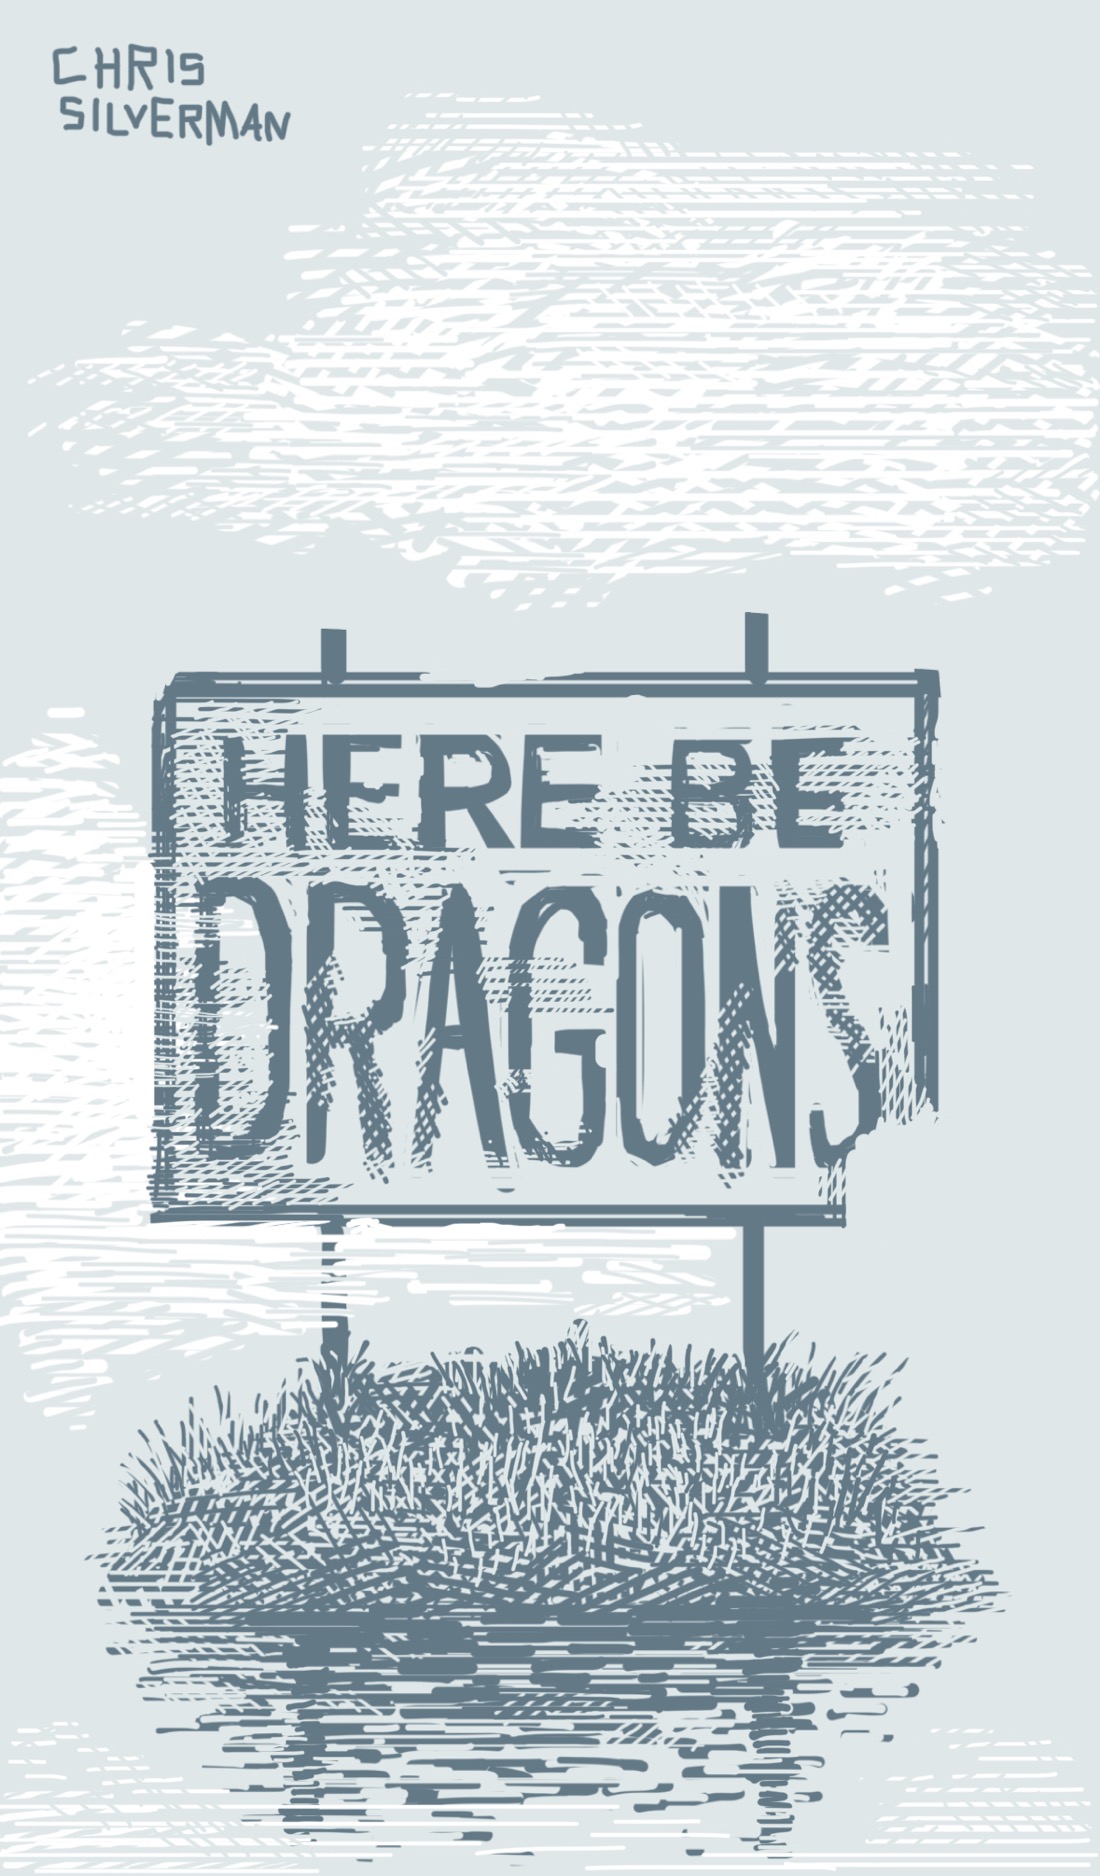 A small, grassy island in the middle of the water. The only thing on the island is a large billboard-like sign, as wide as the island, with the words "here be dragons" on it in rough, weatherbeaten lettering. The sign is pretty weatherbeaten itself, with worn edges and a chunk missing from the lower right corner. The only other thing visible are wispy clouds behind the sign. The drawing is gray-green ink on a light gray-green background. The clouds and some of the water texture are white.